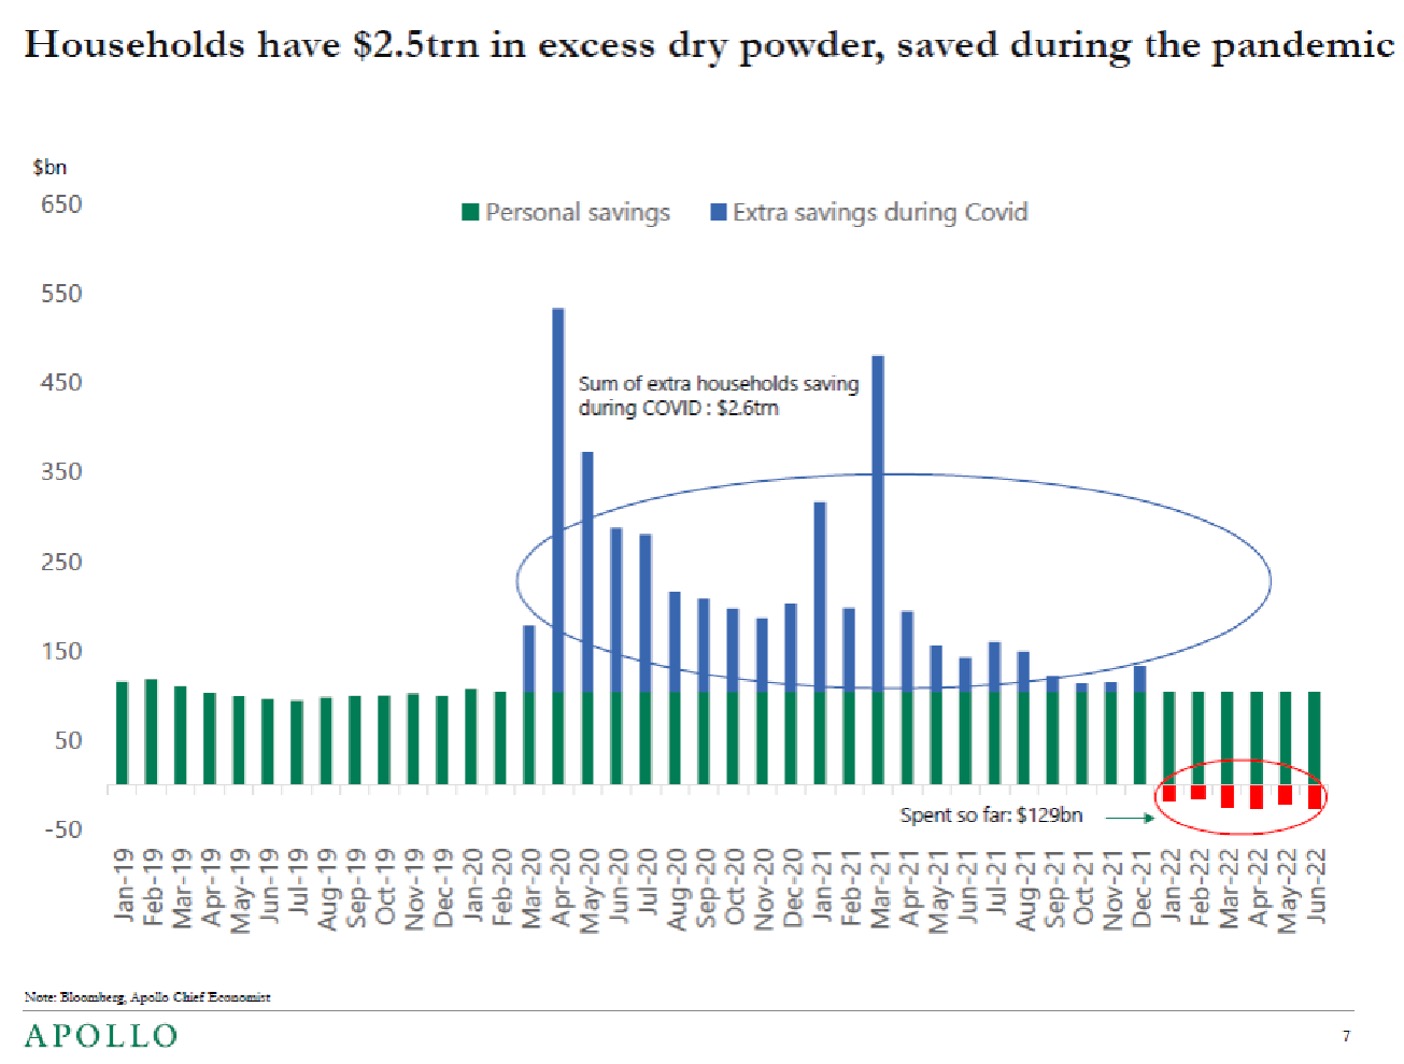 Households have $2.5 trillion in excess dry powder, saved during the pandemic